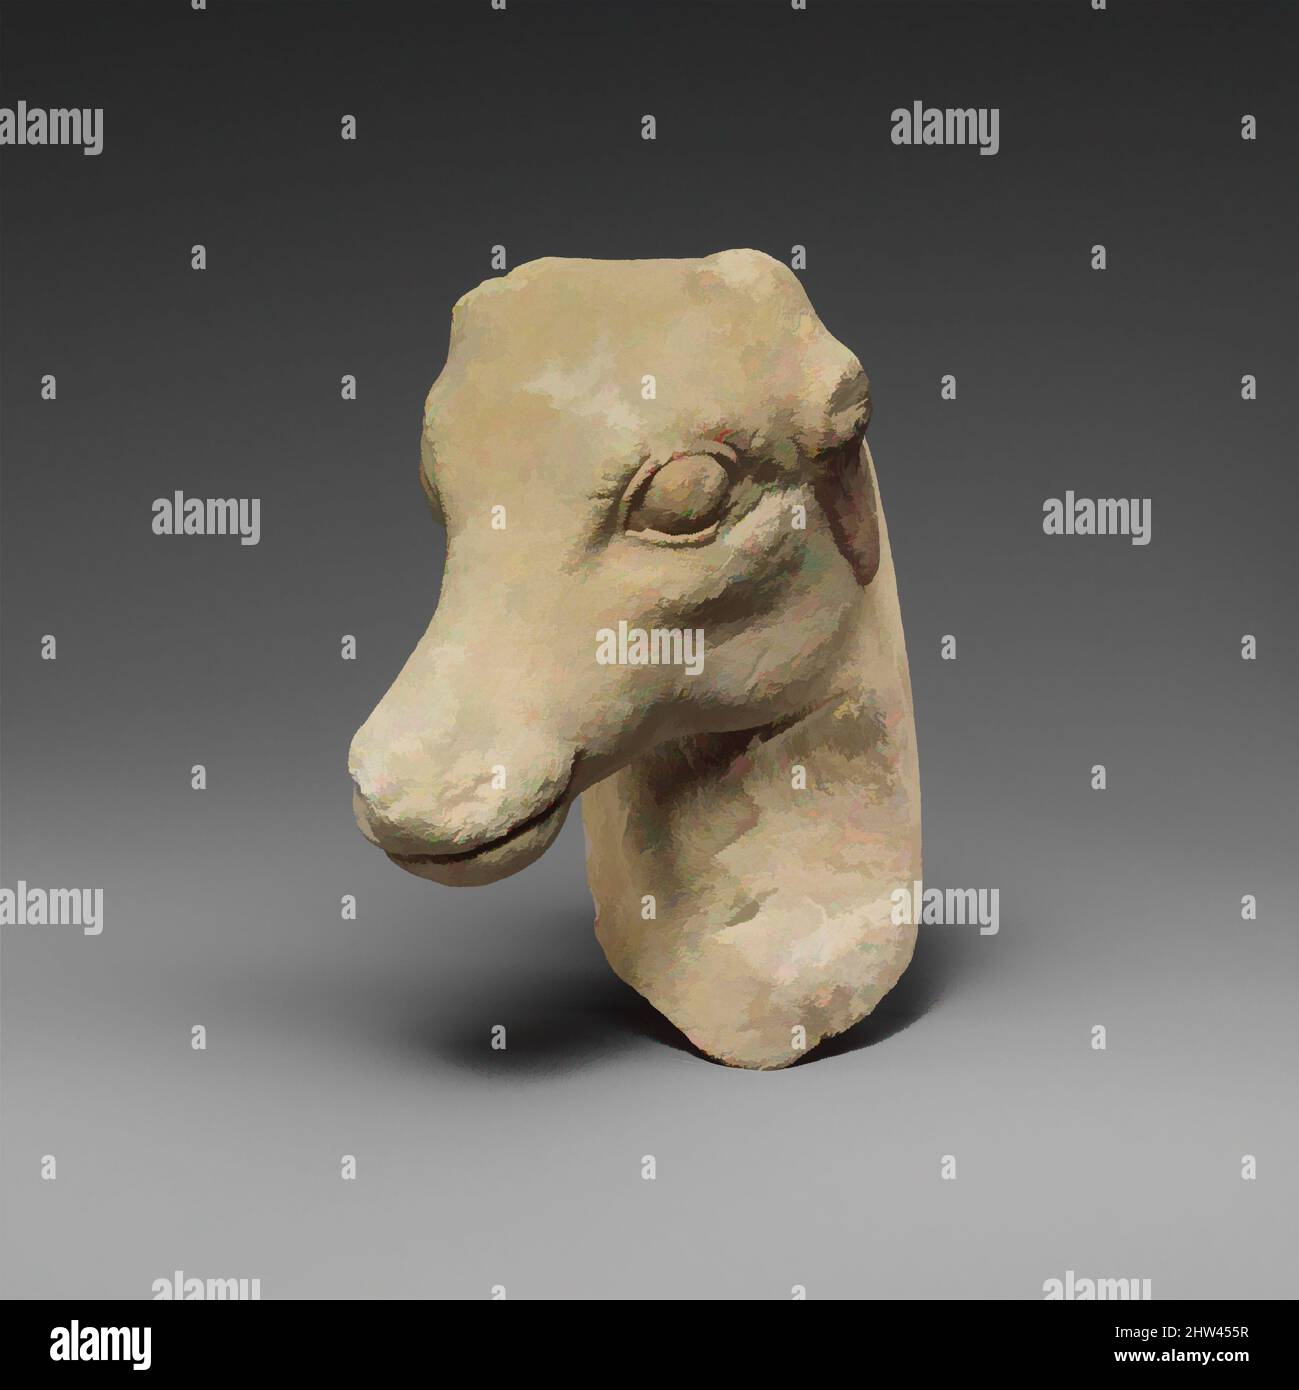 Art inspired by Limestone head of a deer, Archaic, late 6th or early 5th century B.C., Cypriot, Limestone, Overall: 5 1/4 x 3 1/8 x 4 3/4 in. (13.3 x 7.9 x 12.1 cm), Stone Sculpture, The small head of a deer has laid back ears painted red and horns visible on the head. The glottis, Classic works modernized by Artotop with a splash of modernity. Shapes, color and value, eye-catching visual impact on art. Emotions through freedom of artworks in a contemporary way. A timeless message pursuing a wildly creative new direction. Artists turning to the digital medium and creating the Artotop NFT Stock Photo